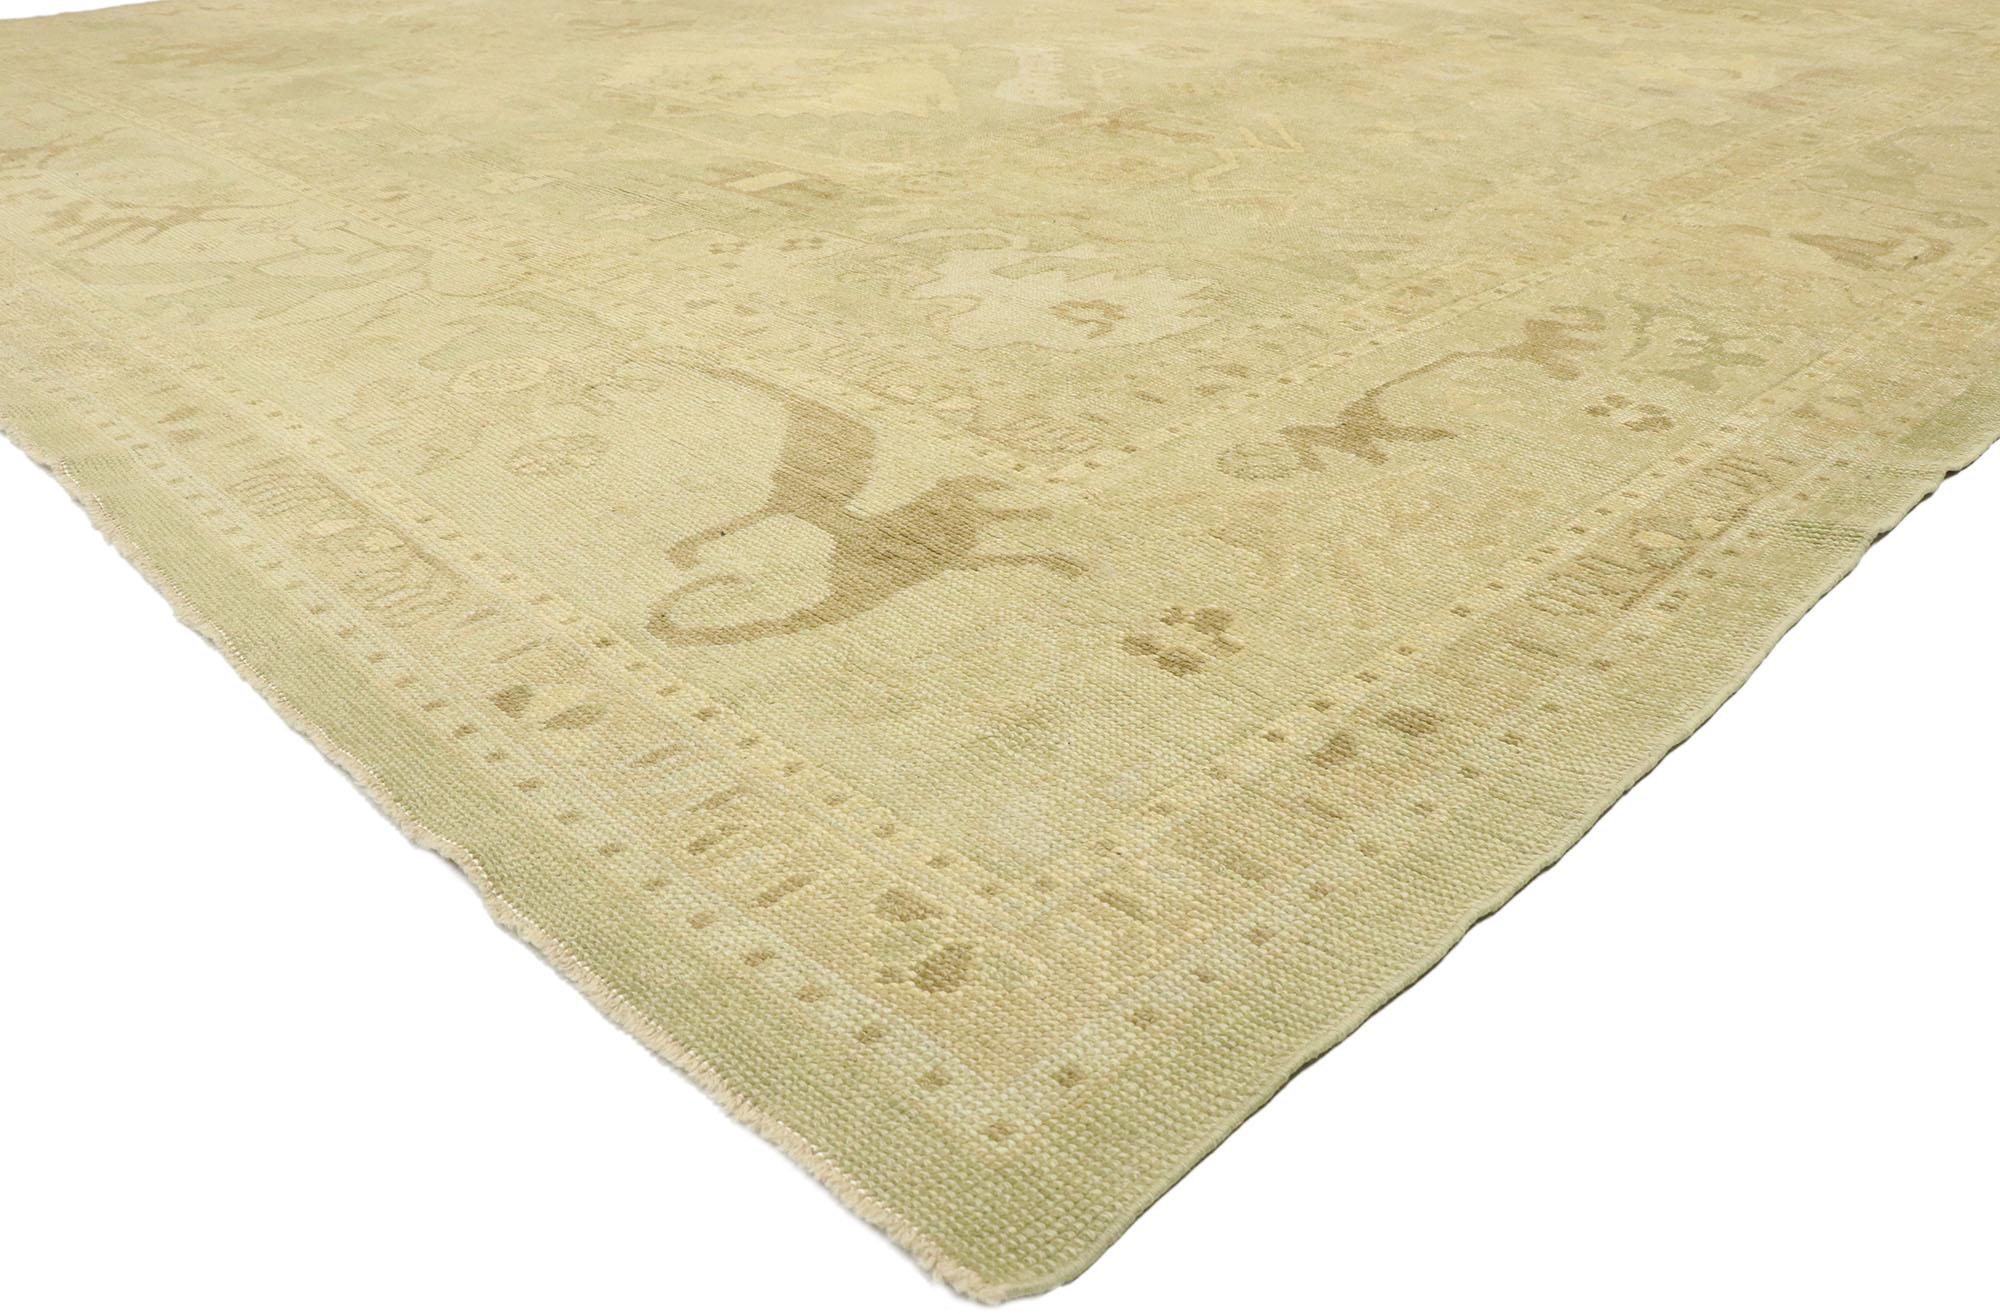 51598, Modern Oushak Turkish Rug, 12'09 x 17'00. 
This hand knotted wool Turkish Oushak rug features an all-over botanical pattern composed of Harshang-style motifs, organic and amorphous shapes spread across a pale mossy background. It is enclosed